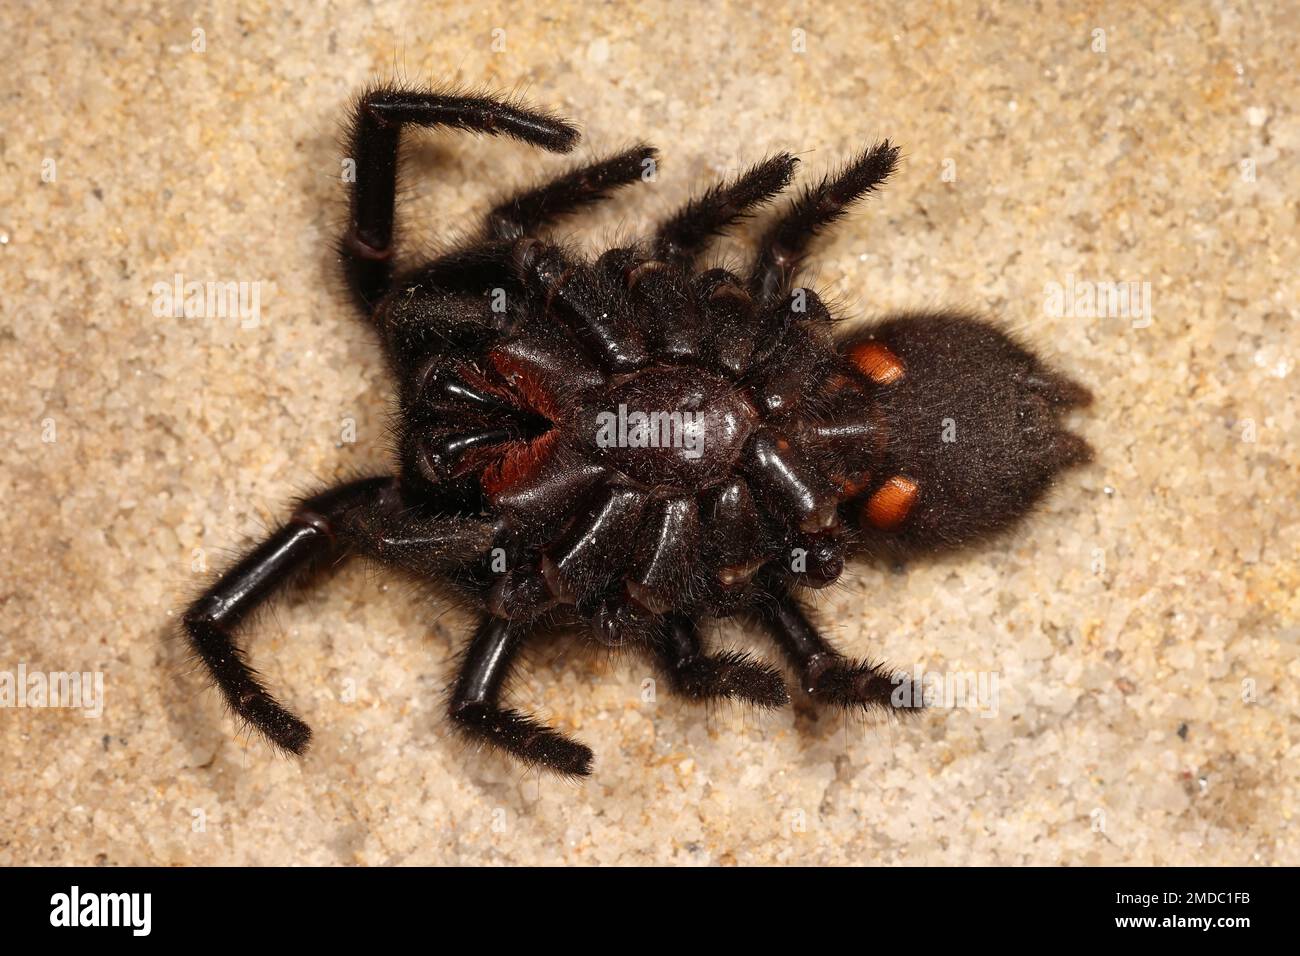 Belly view of Highly venomous Sydney Funnel Web Spider Stock Photo